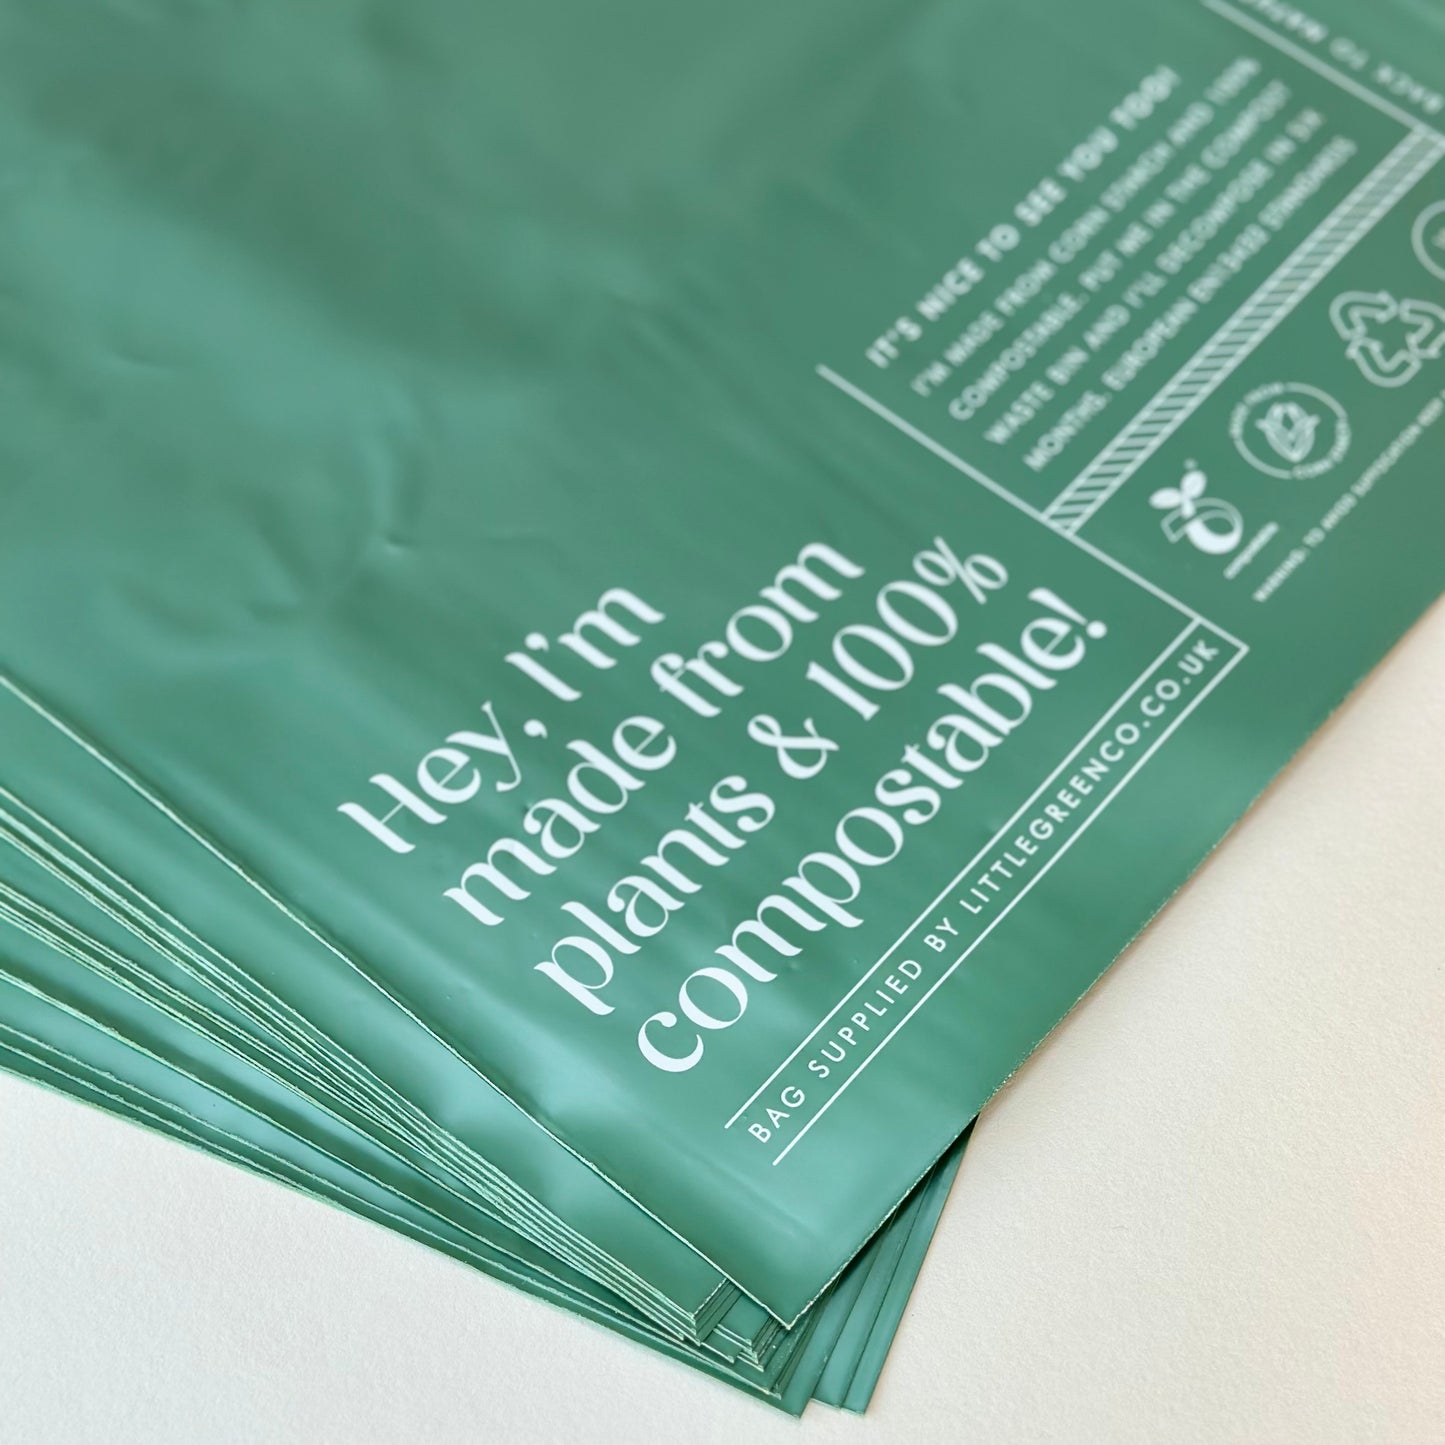 Eco-Friendly | Compostable Mailing bags - 100% cornstarch